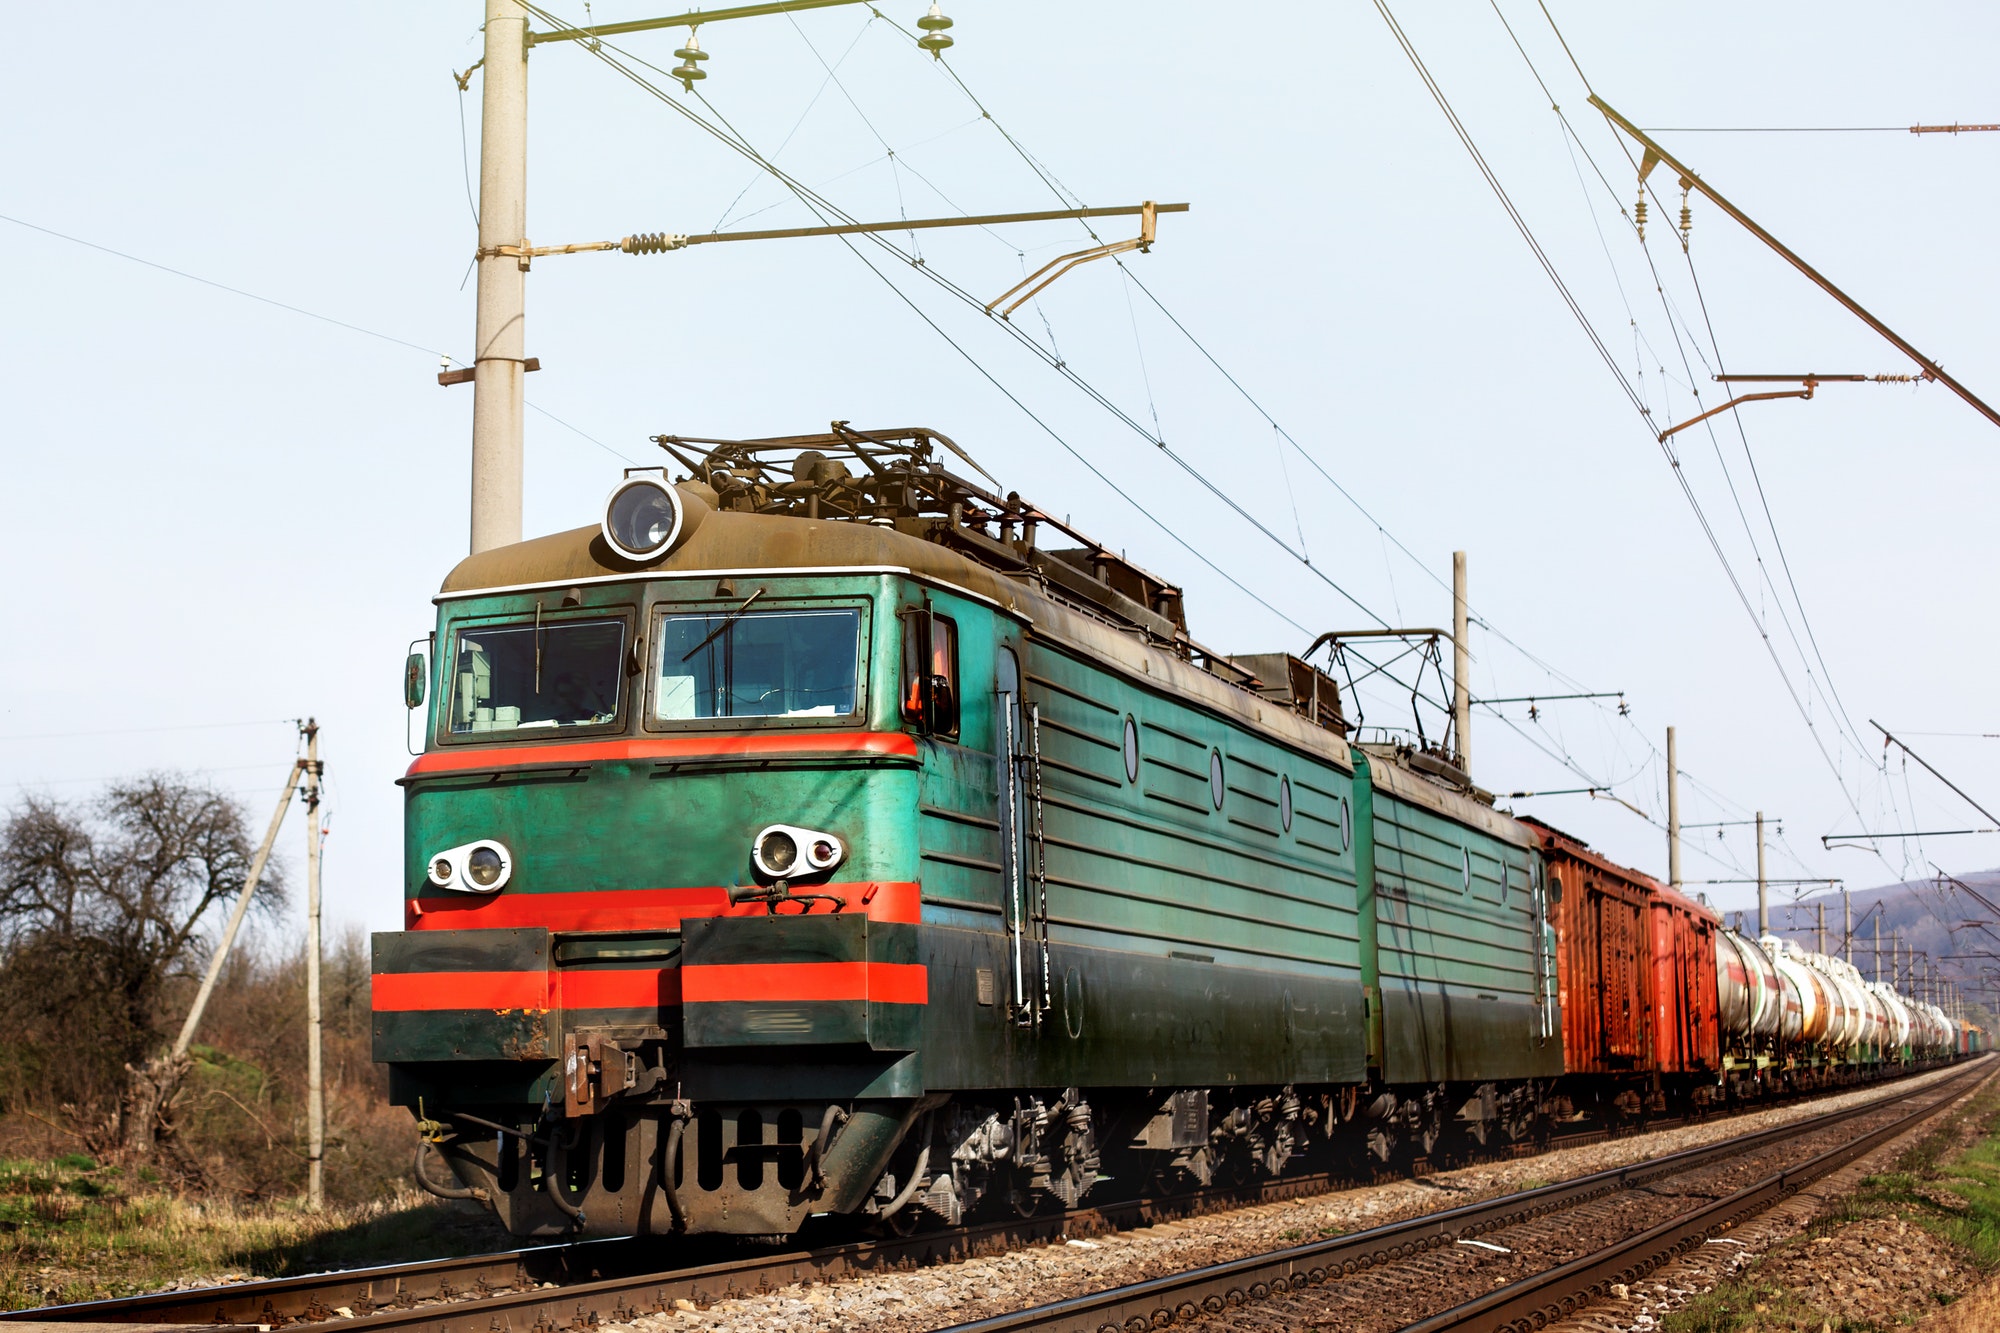 front-of-old-train-crossing-railway-and-transporting-goods-carriage-transportation-concept.jpg